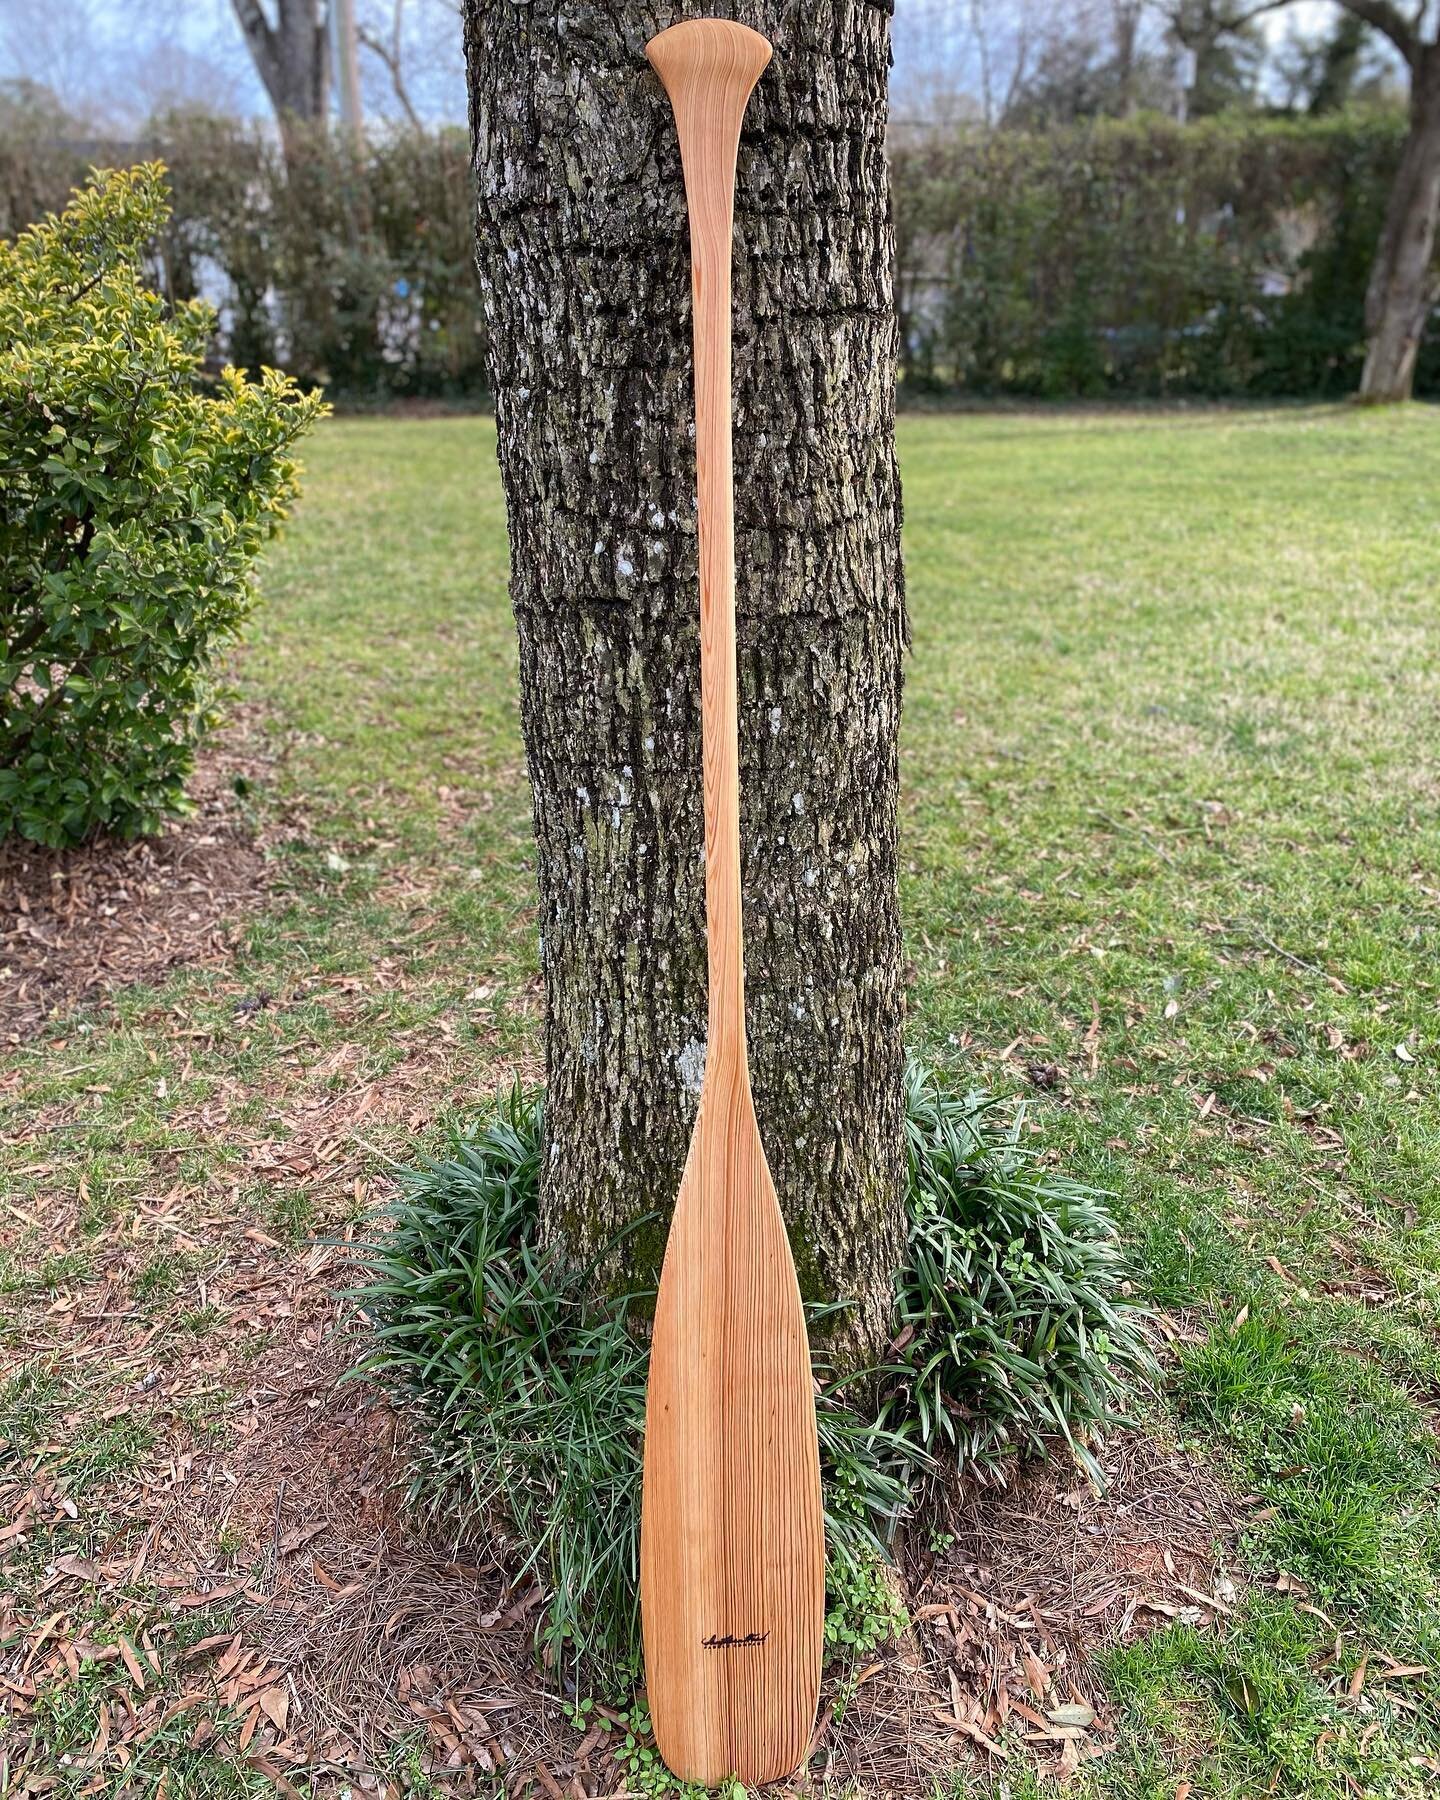 This beautiful Beaver Tail Canoe Paddle is up for auction to benefit @handsforholly a great organization in Charlotte who supports families who have children diagnosed with cancer. 

Bidding is open on auction items until Saturday at noon. Visit thei